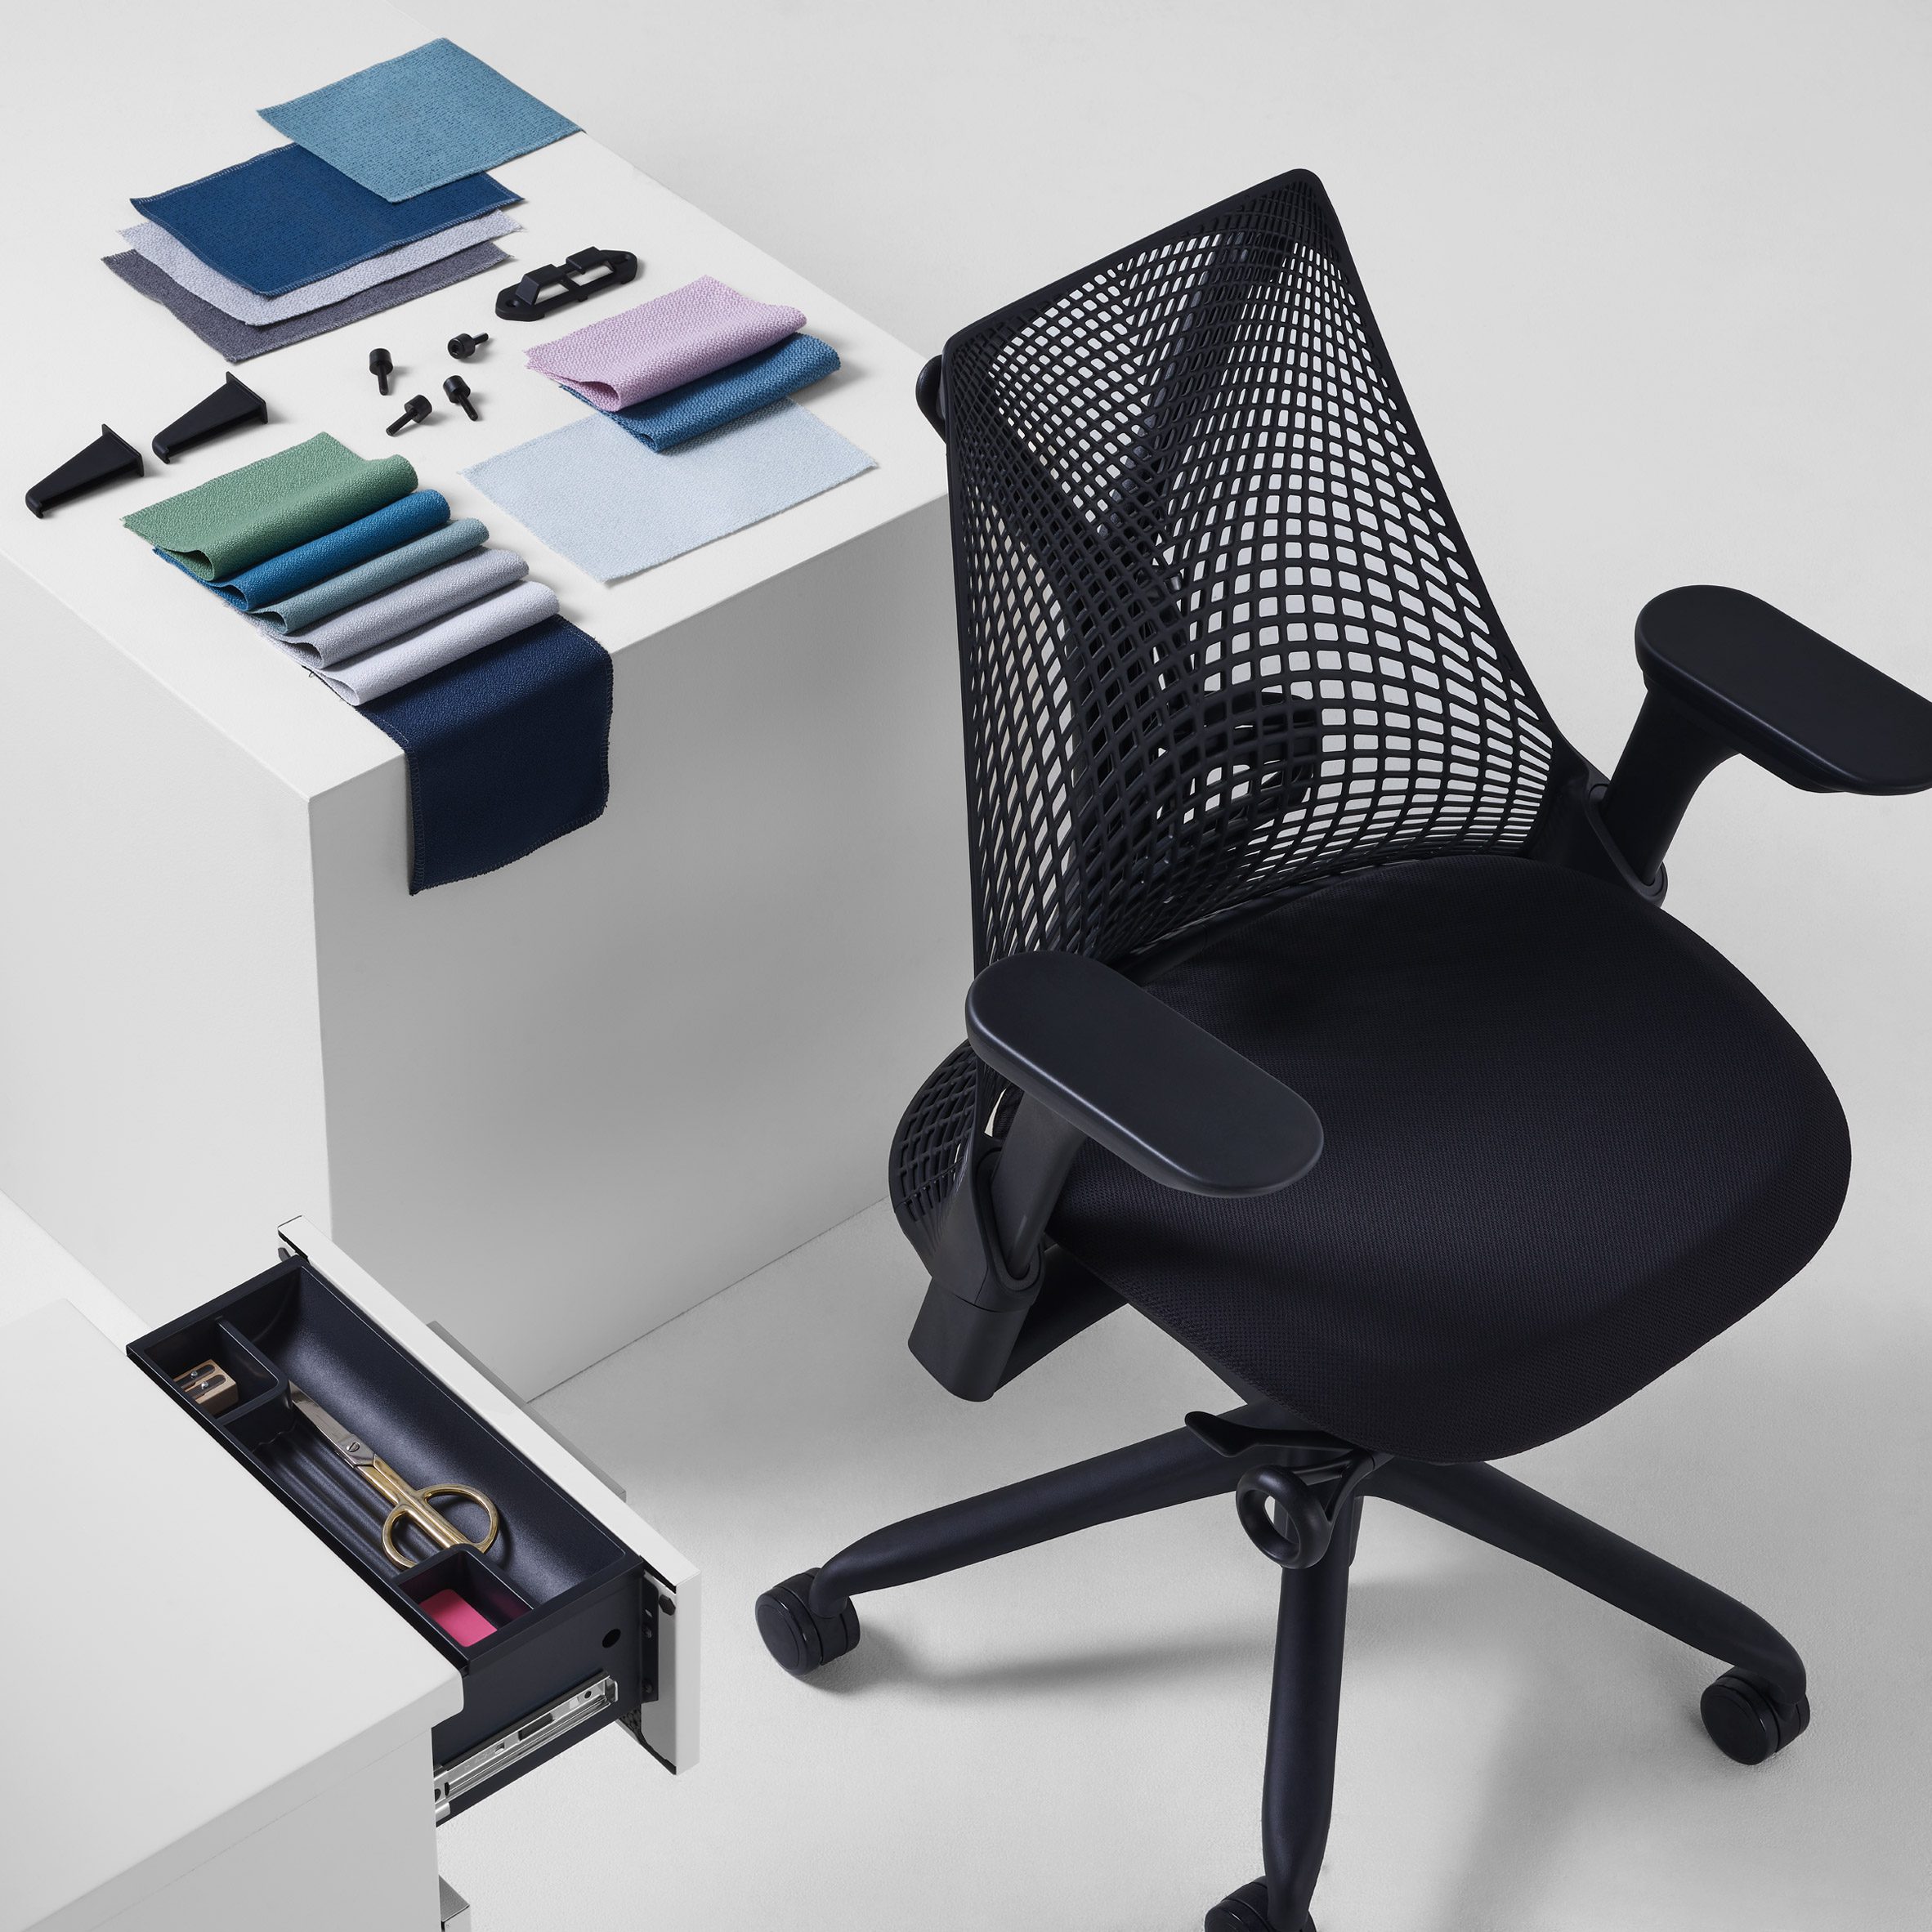 Herman Miller and Yves Béhar's Sayl chair in black photographer in an abstracted office setting